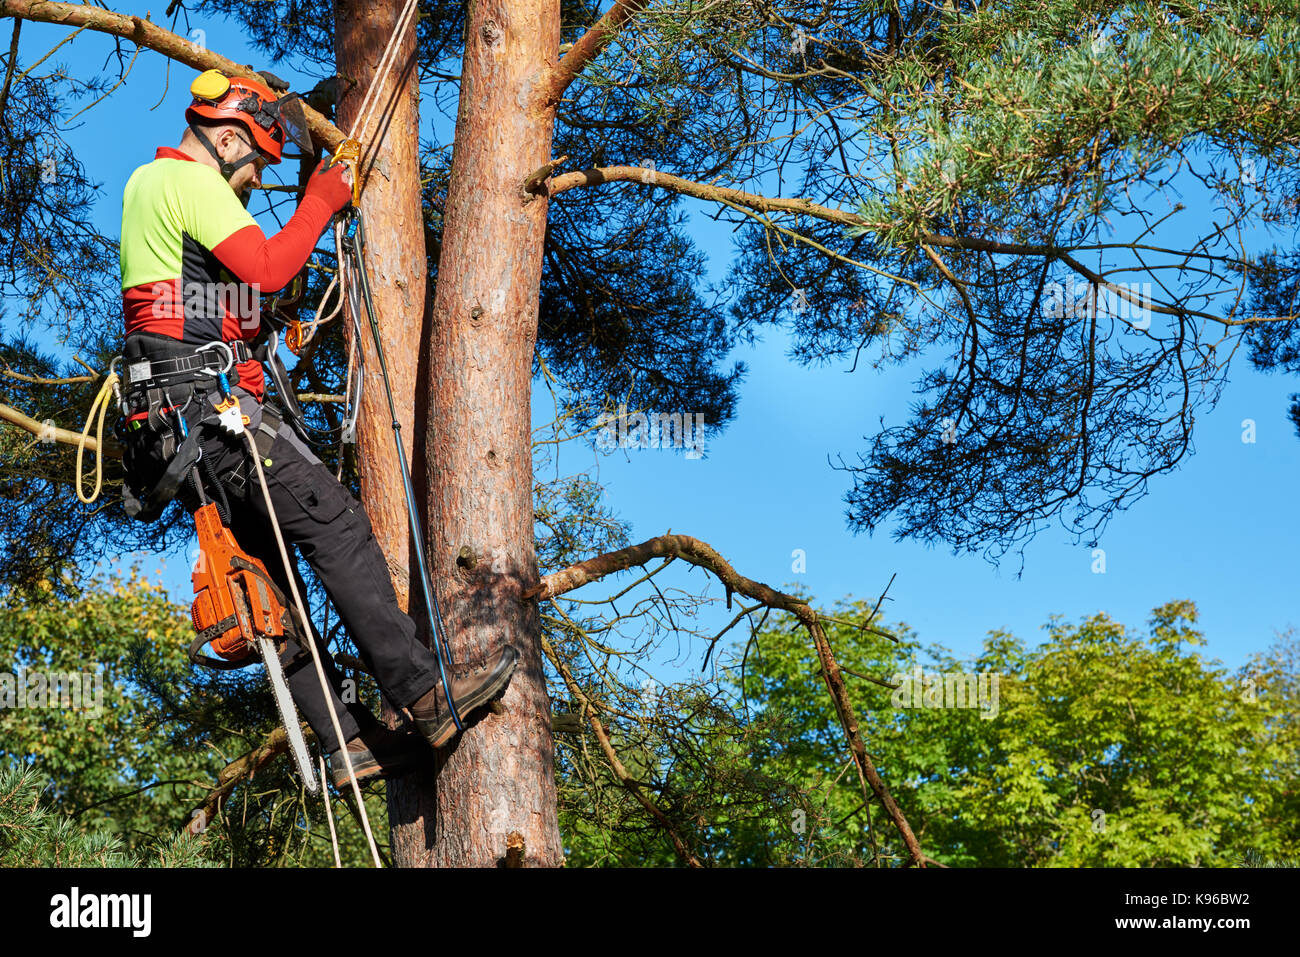 Lumberjack with saw and harness climbing a tree Stock Photo